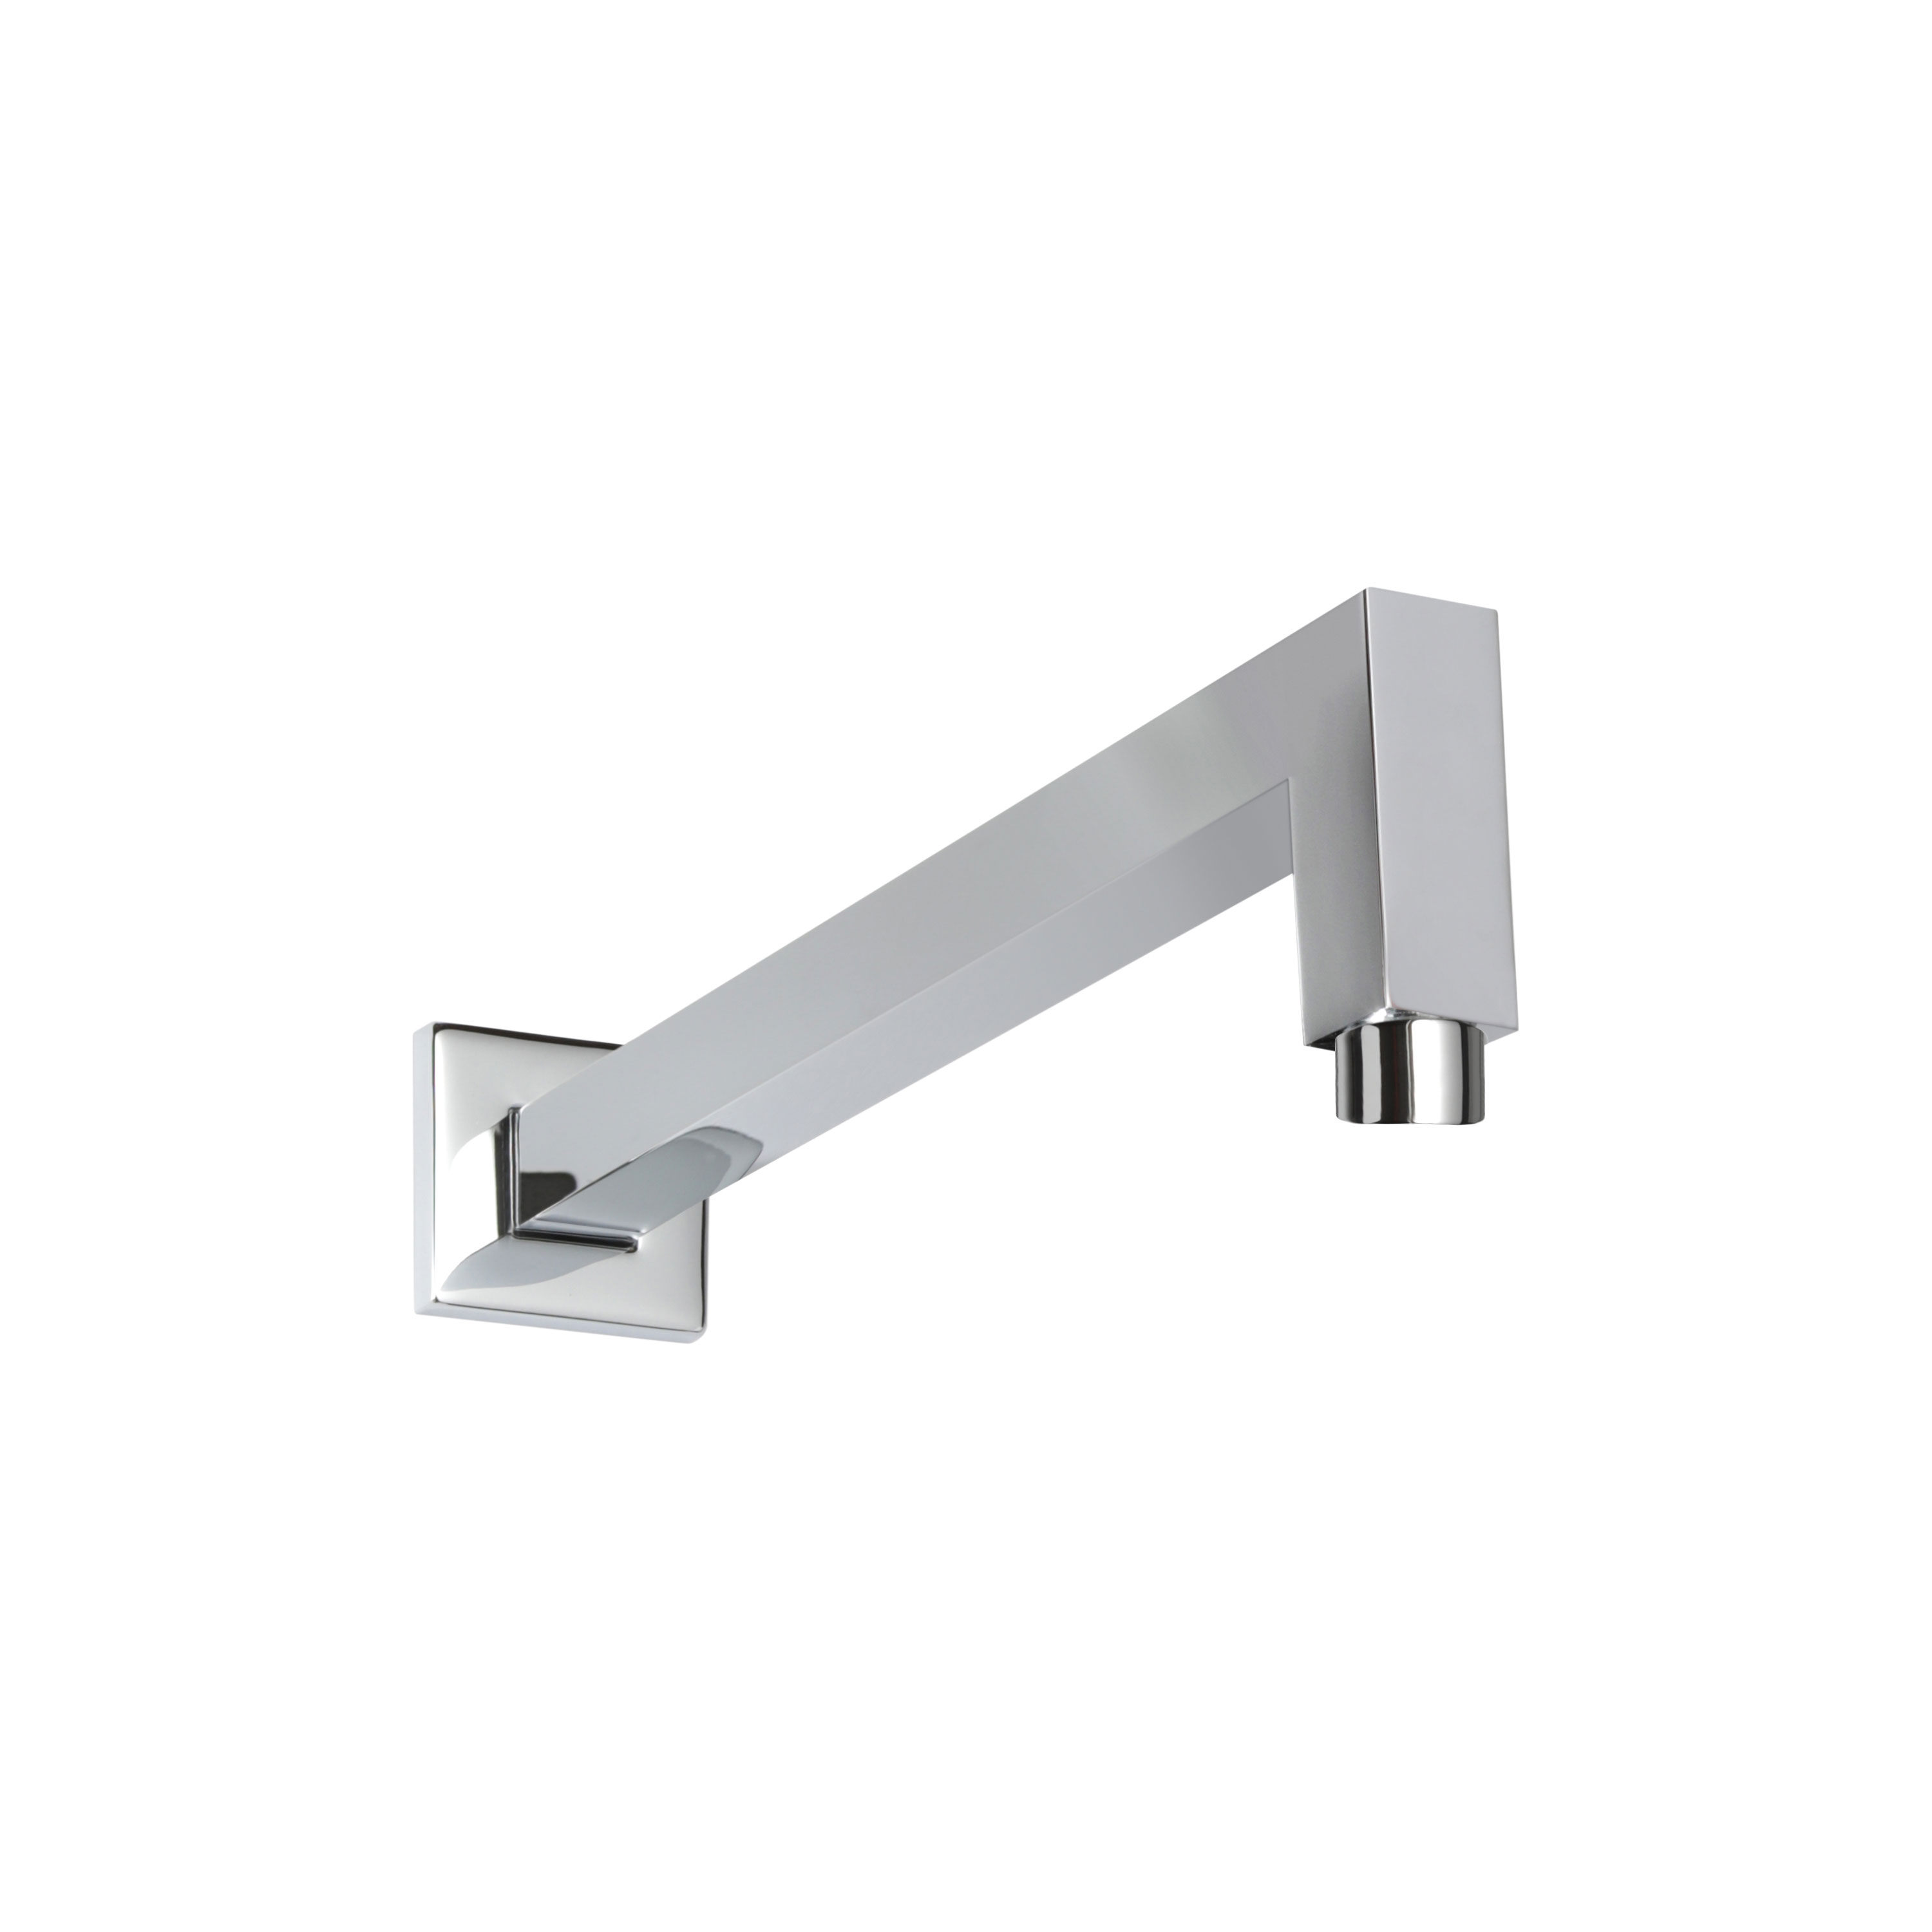 Thermasol 15-1004-PC 16" - 90 Degree Wall Shower Arm Square - Polished Chrome